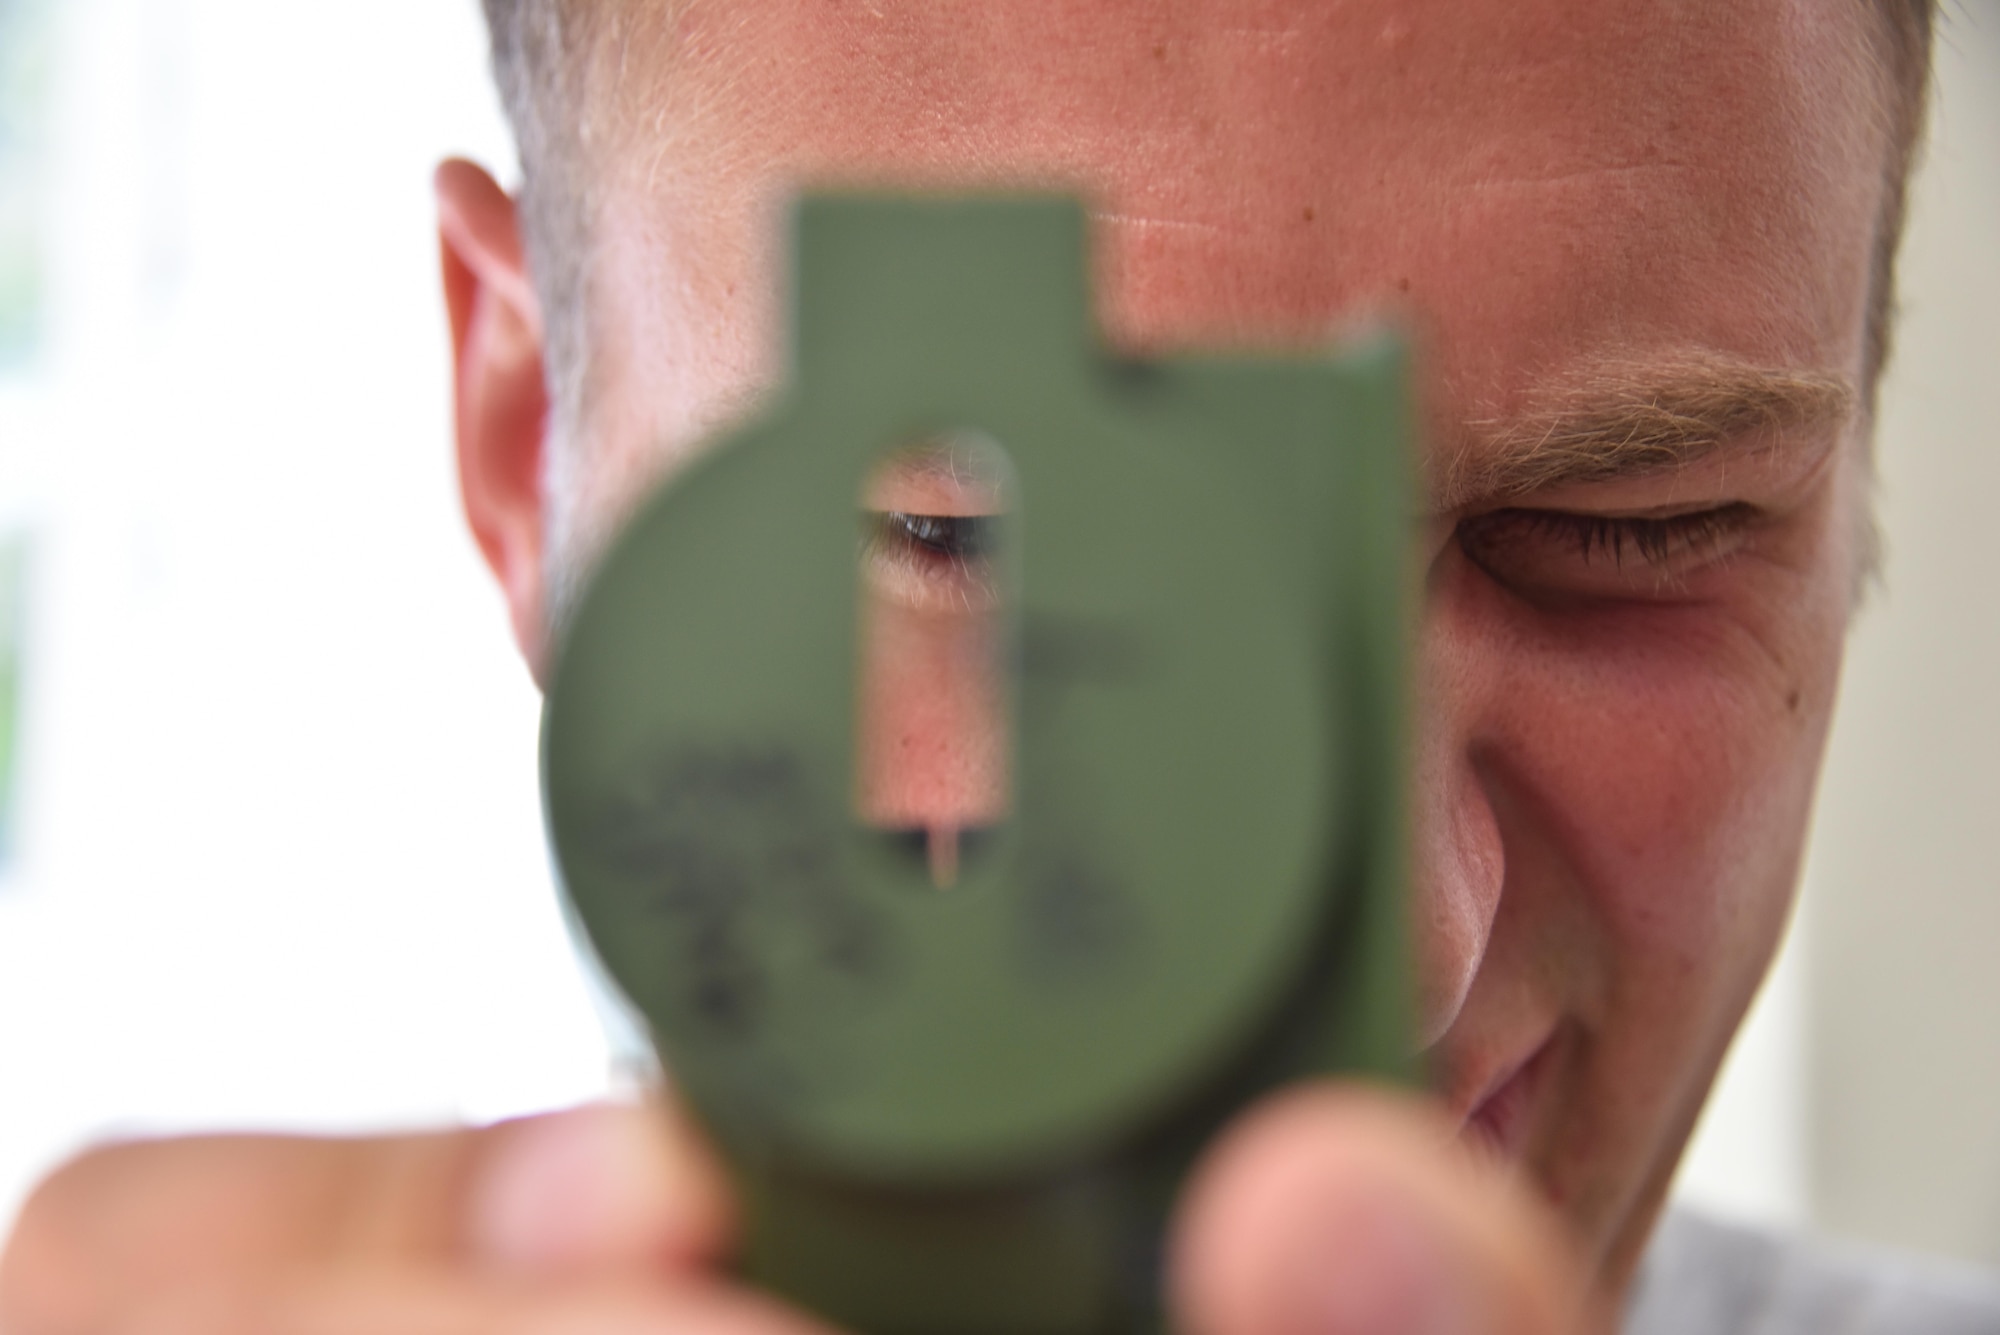 Capt. Charlie Baker, pilot with the 911th Airlift Wing, looks through a compass during land survival training at Naval Air Station Key West, Florida, August 19, 2016. Airmen with the 911th Operations Group conducted training with a certified Survival, Evasion, Resistance and Escape instructor and later participated in an off-base evasion and escape scenario. (U.S. Air Force photo by Staff Sgt. Marjorie A. Bowlden)